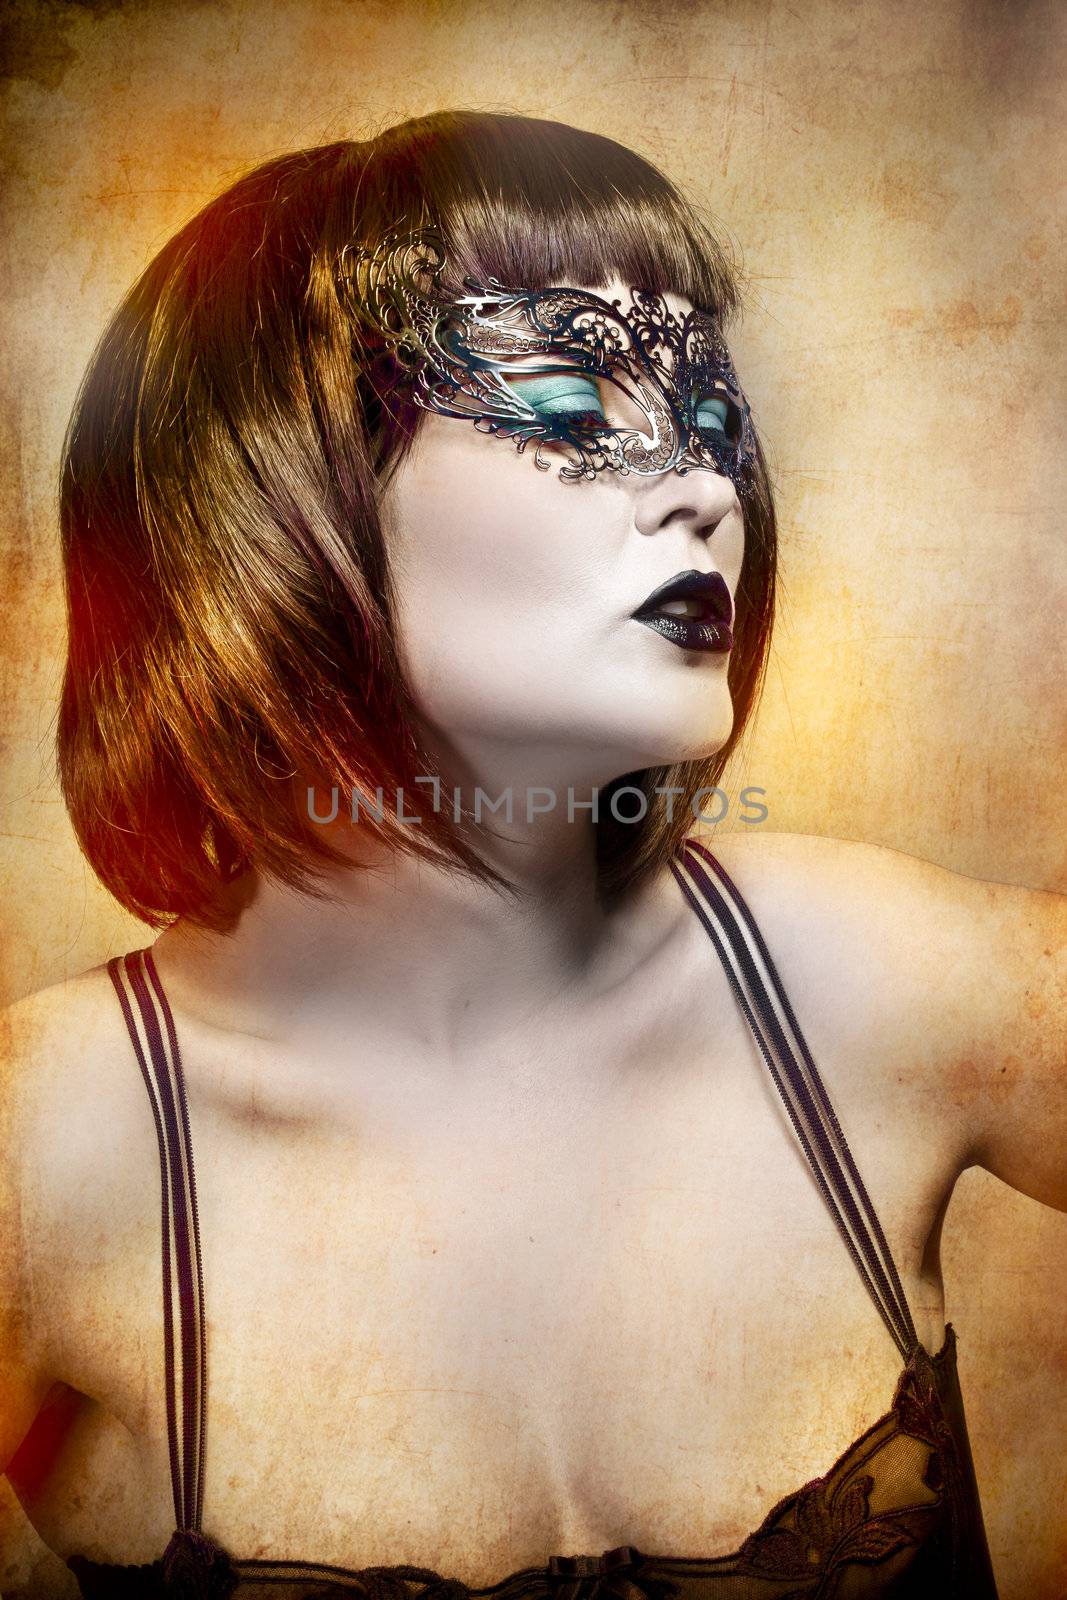 mysterious woman with Venetian mask and gothic style